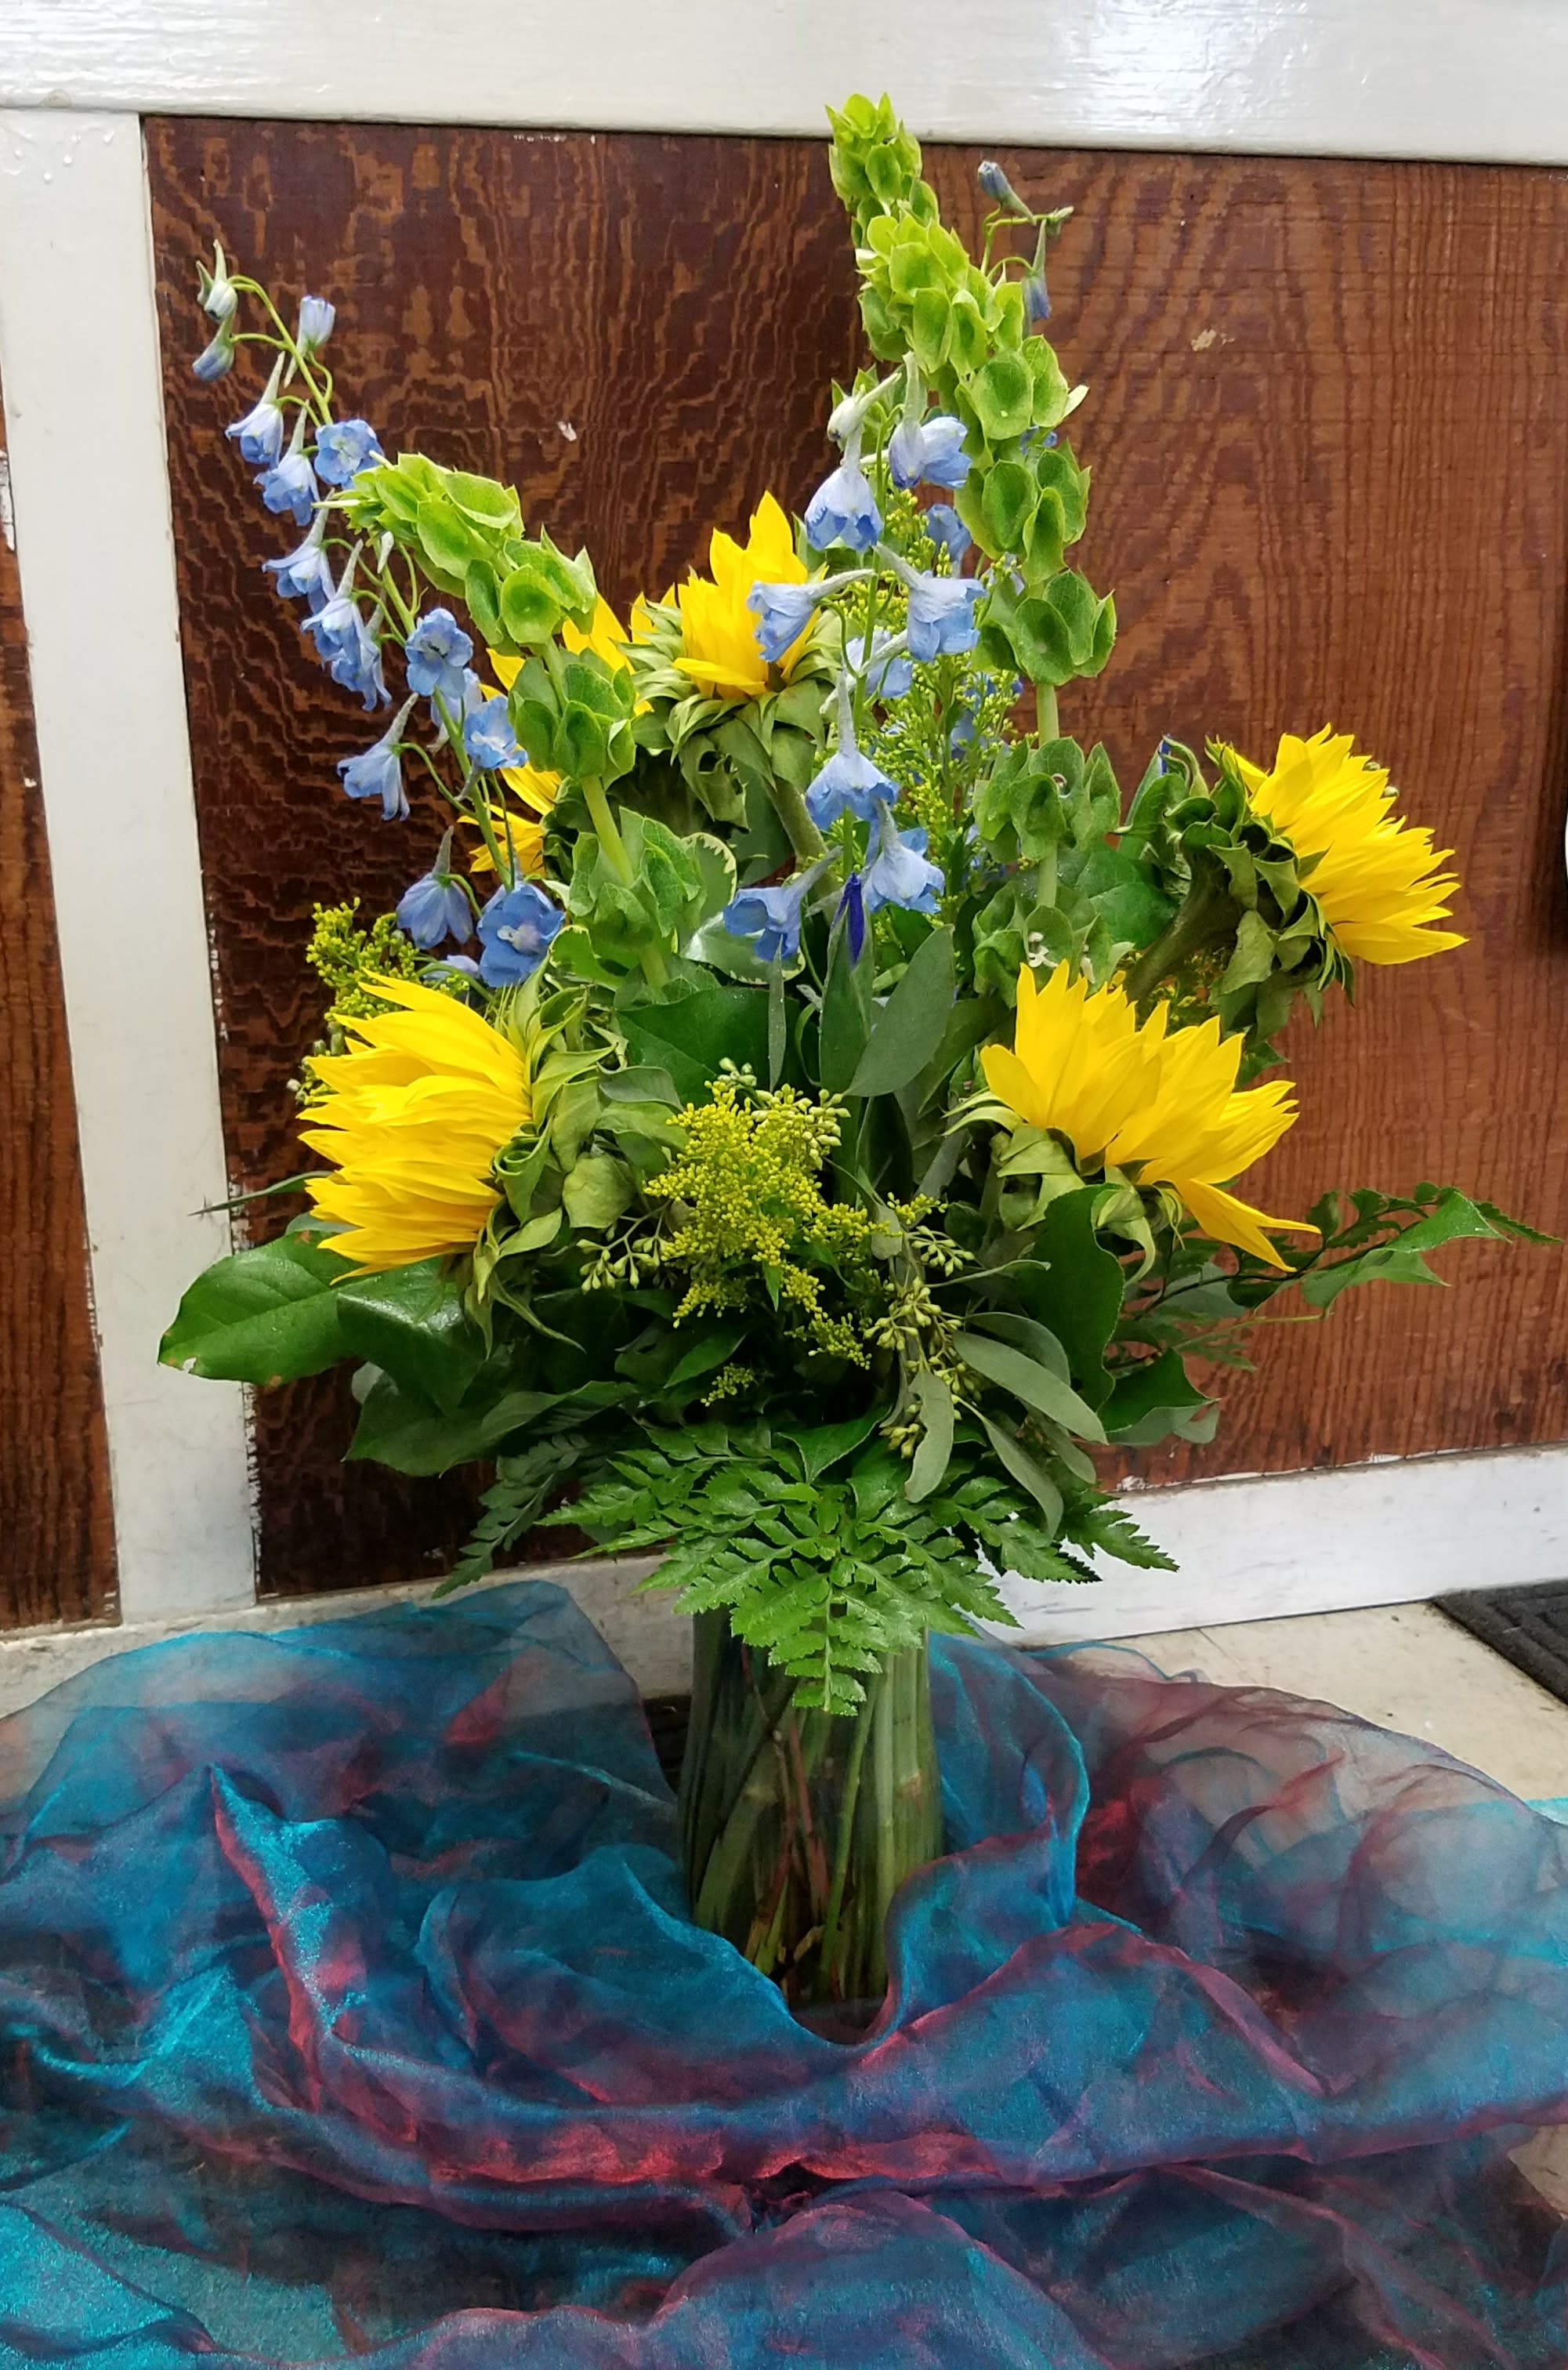 Sunshine Sky - This cheery arrangement is a great way to brighten up any space. Sky blue delphinium and Sunflowers are the stand-out blooms here. Green Bells of Ireland add contrast, and blue iris make the finishing touch.